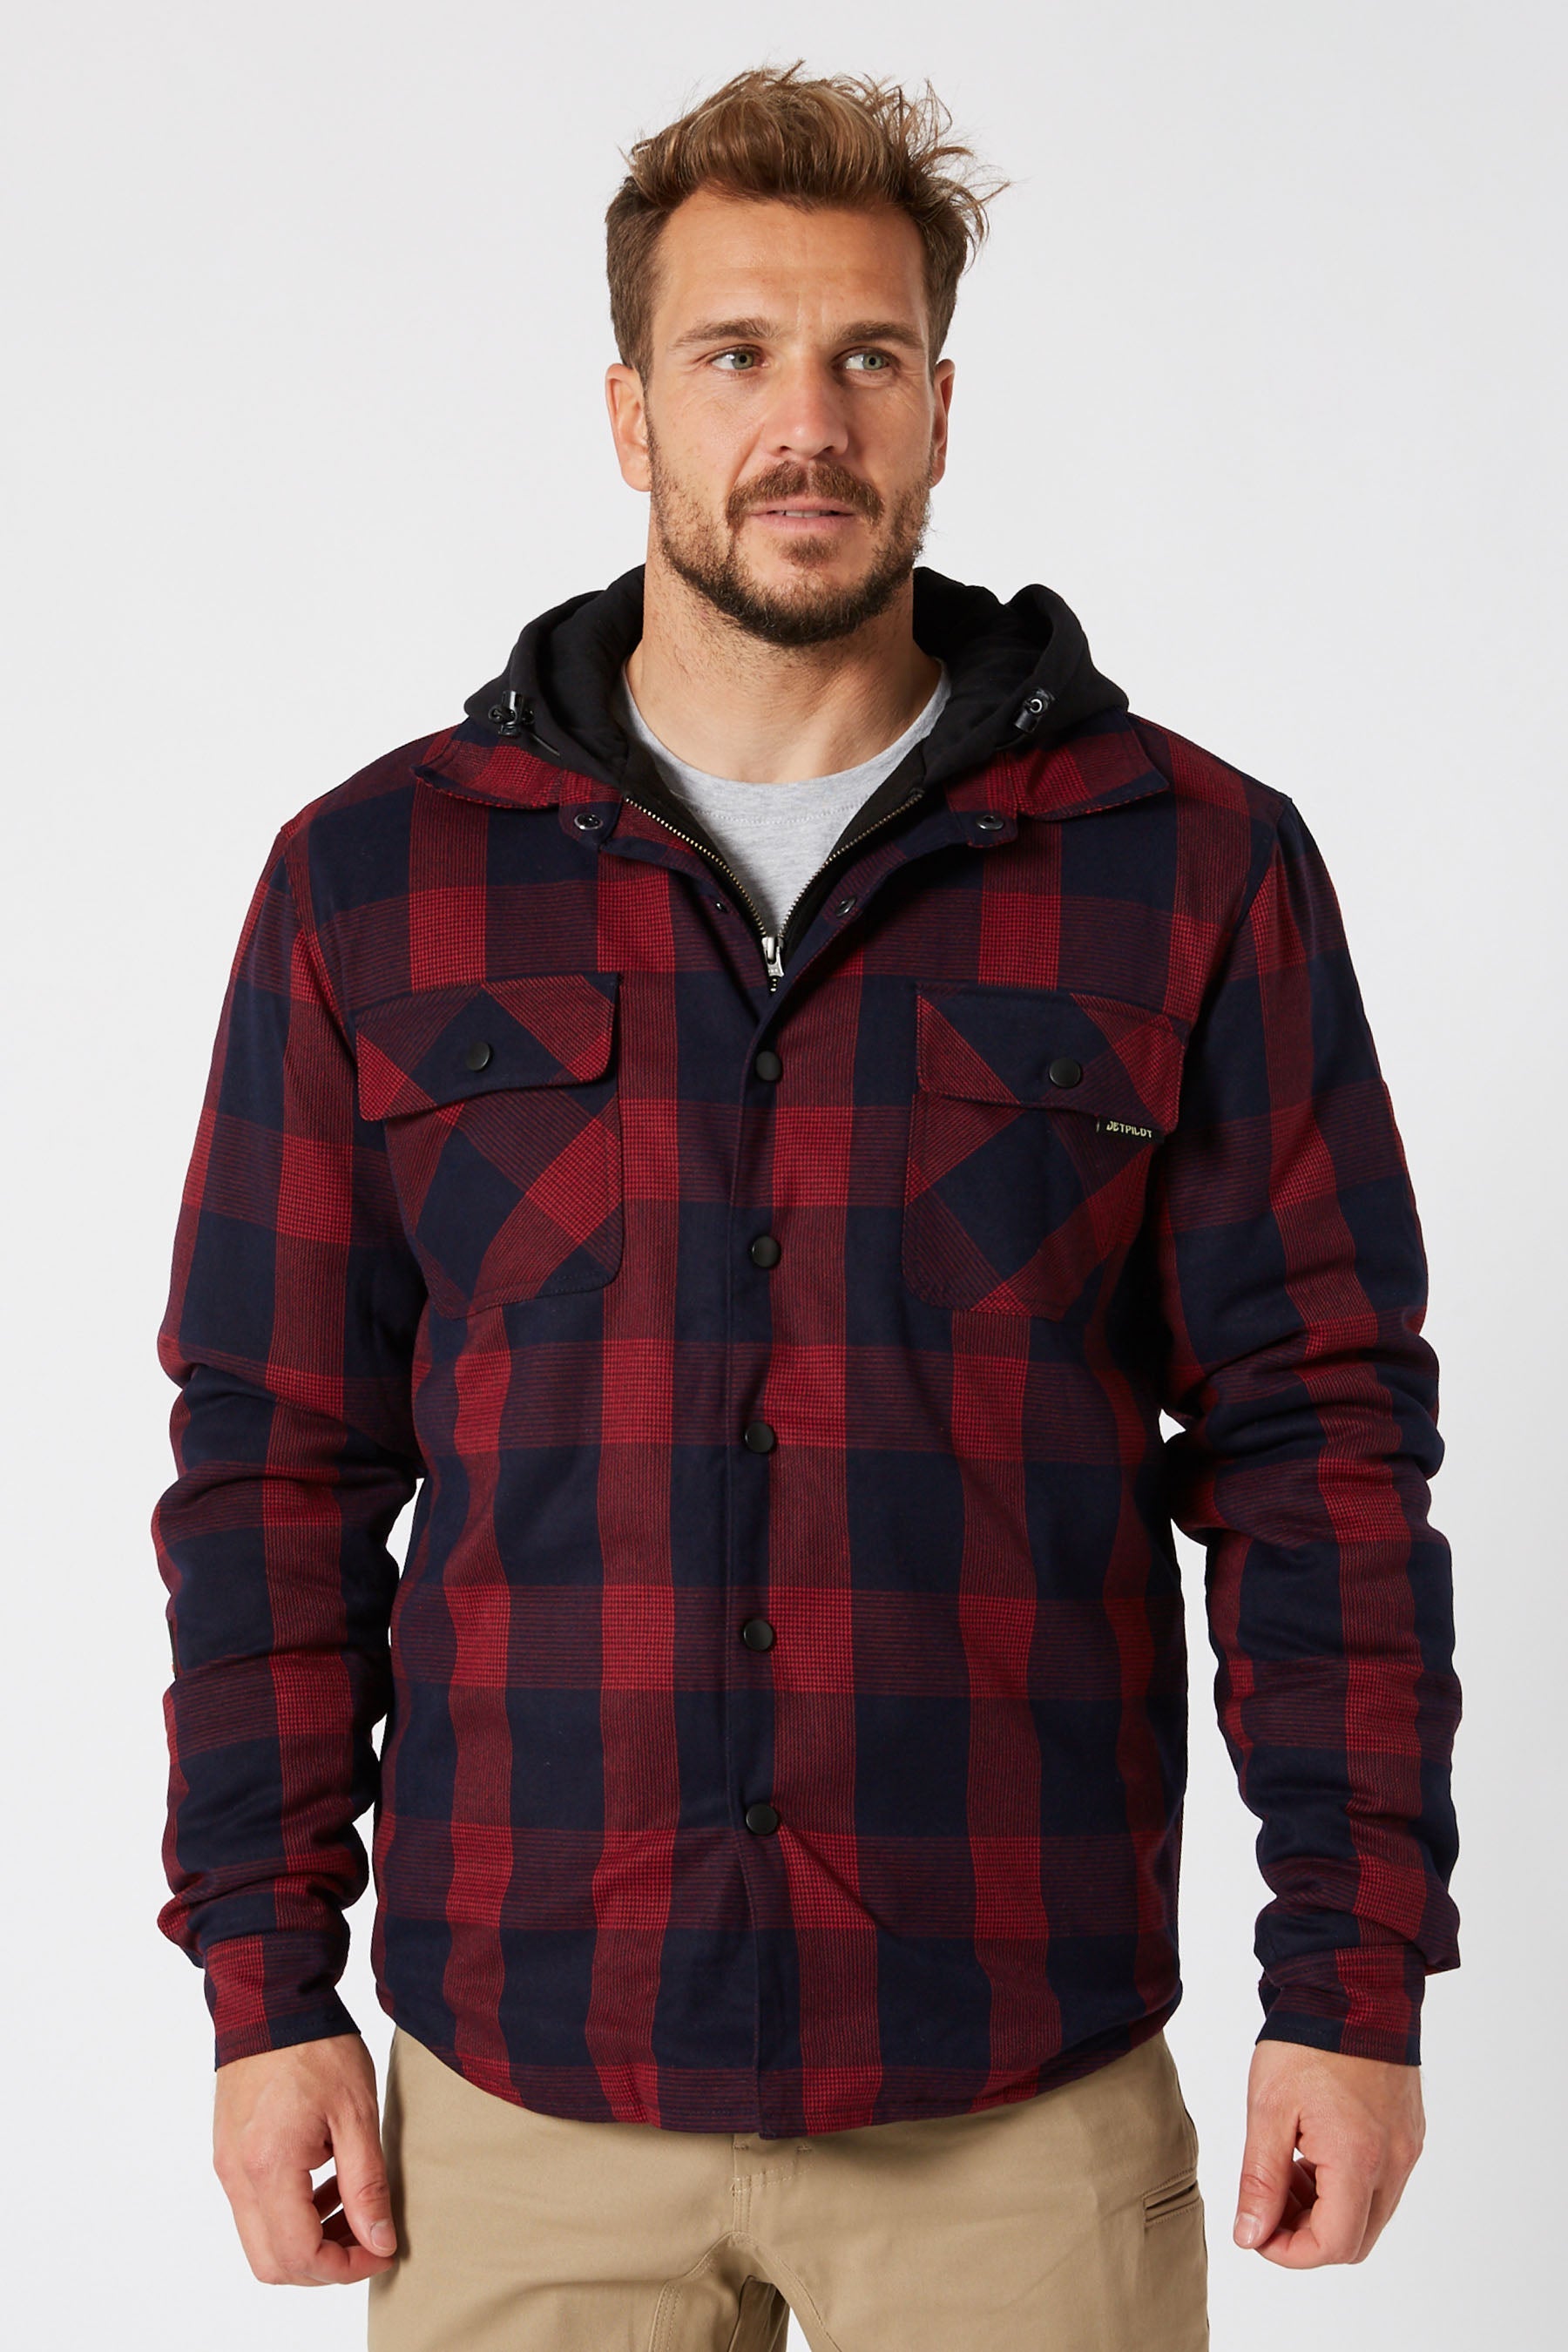 This Flannel Jacket Is Up to 40% Off at Amazon